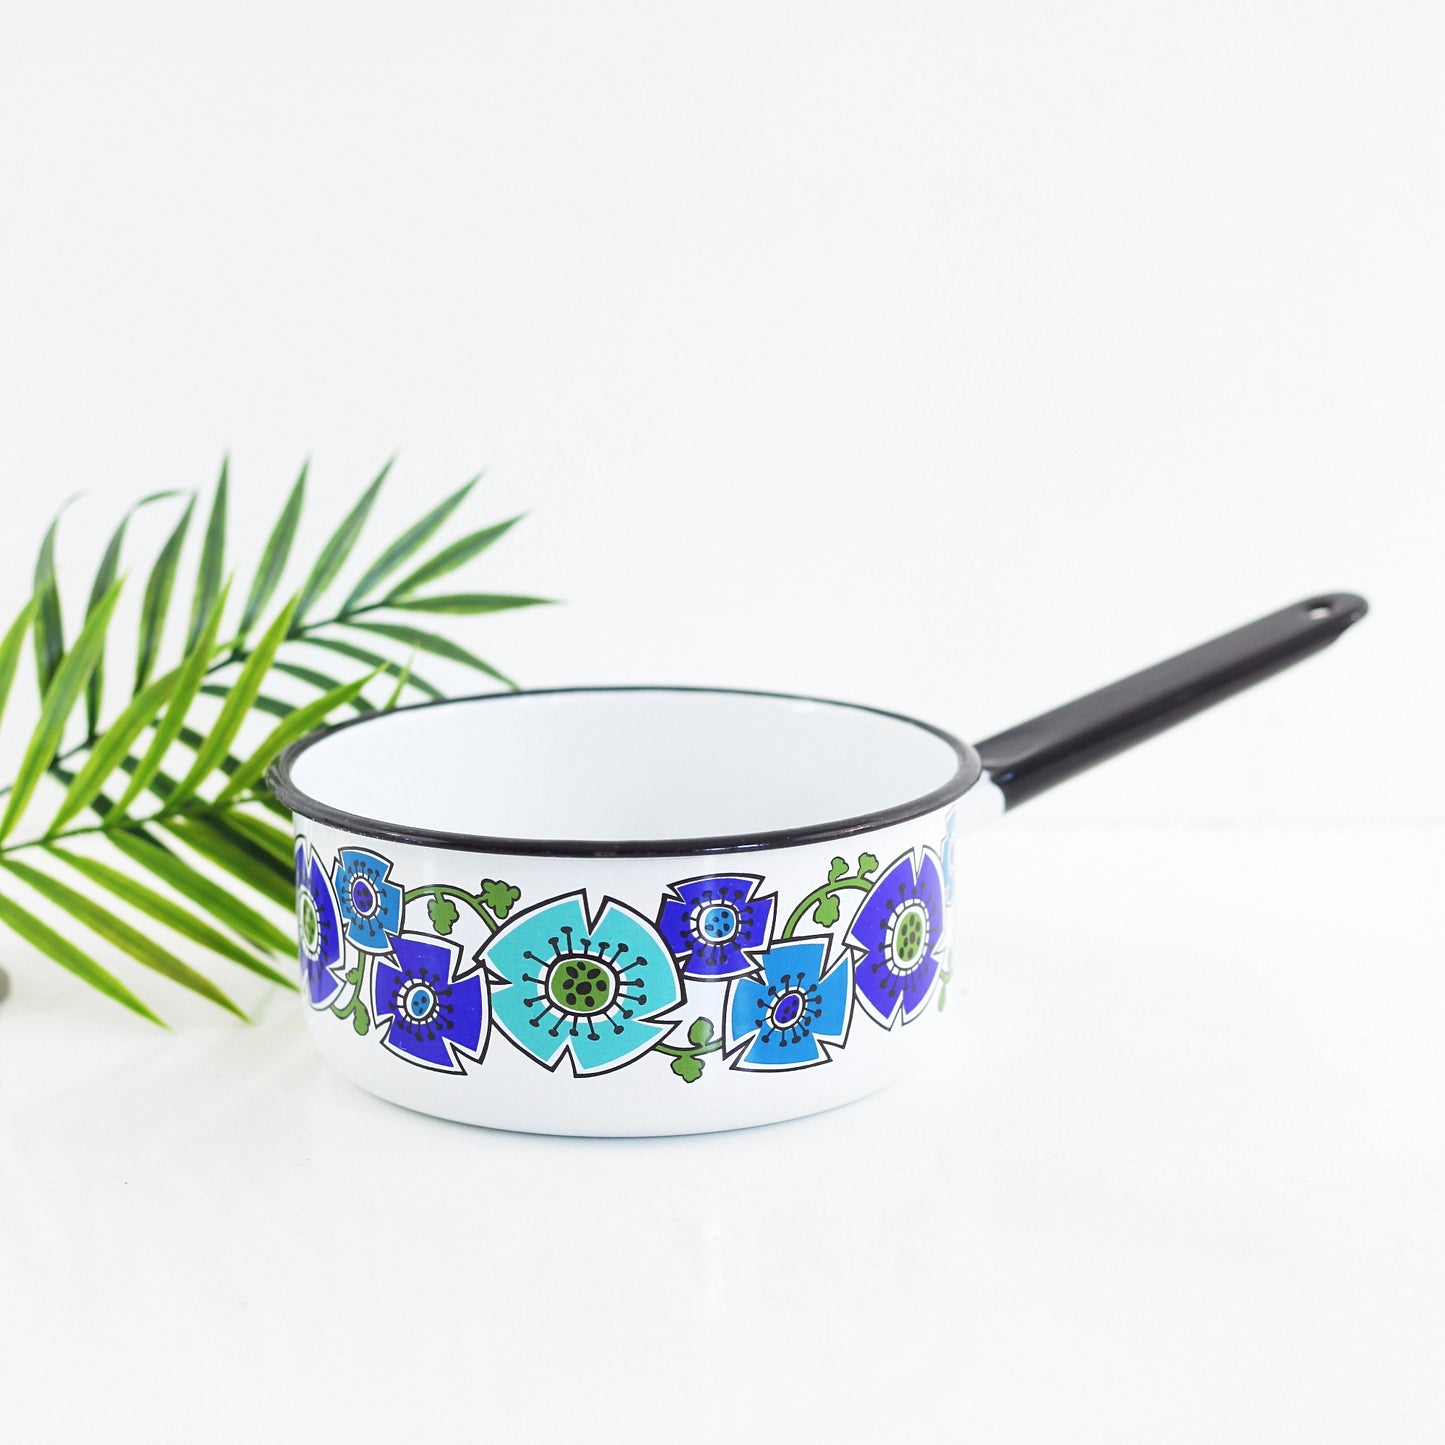 SOLD - Vintage Enamel Sauce Pan with Turquoise & Cobalt Flowers